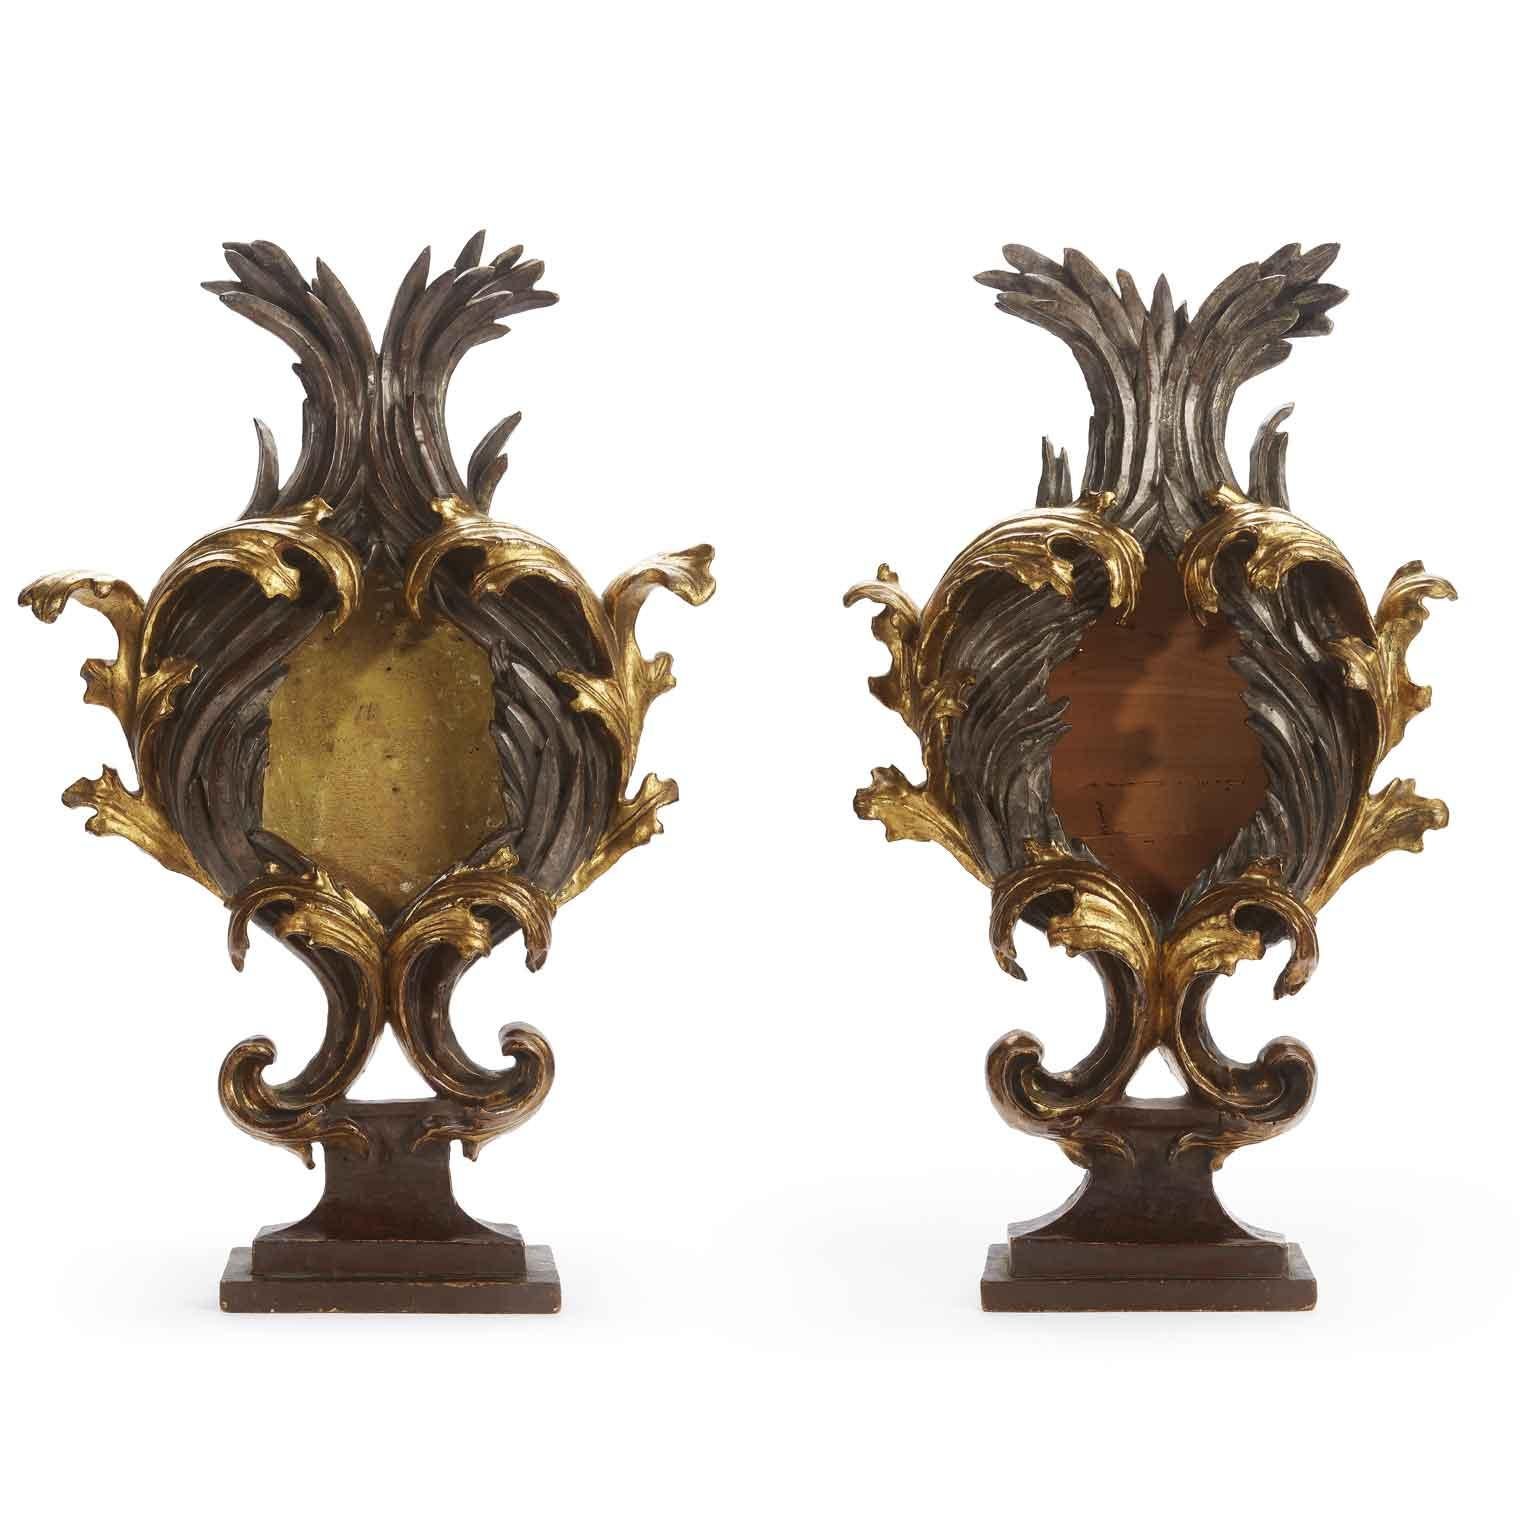 18th Century monumental pair of gilt and silvered wooden reliquary coming from Central Italy, decorated with deep scrolling pattern carving and dating back to the first half of 18th century, 1730 circa.

Standing on an upside-down shelf shaped